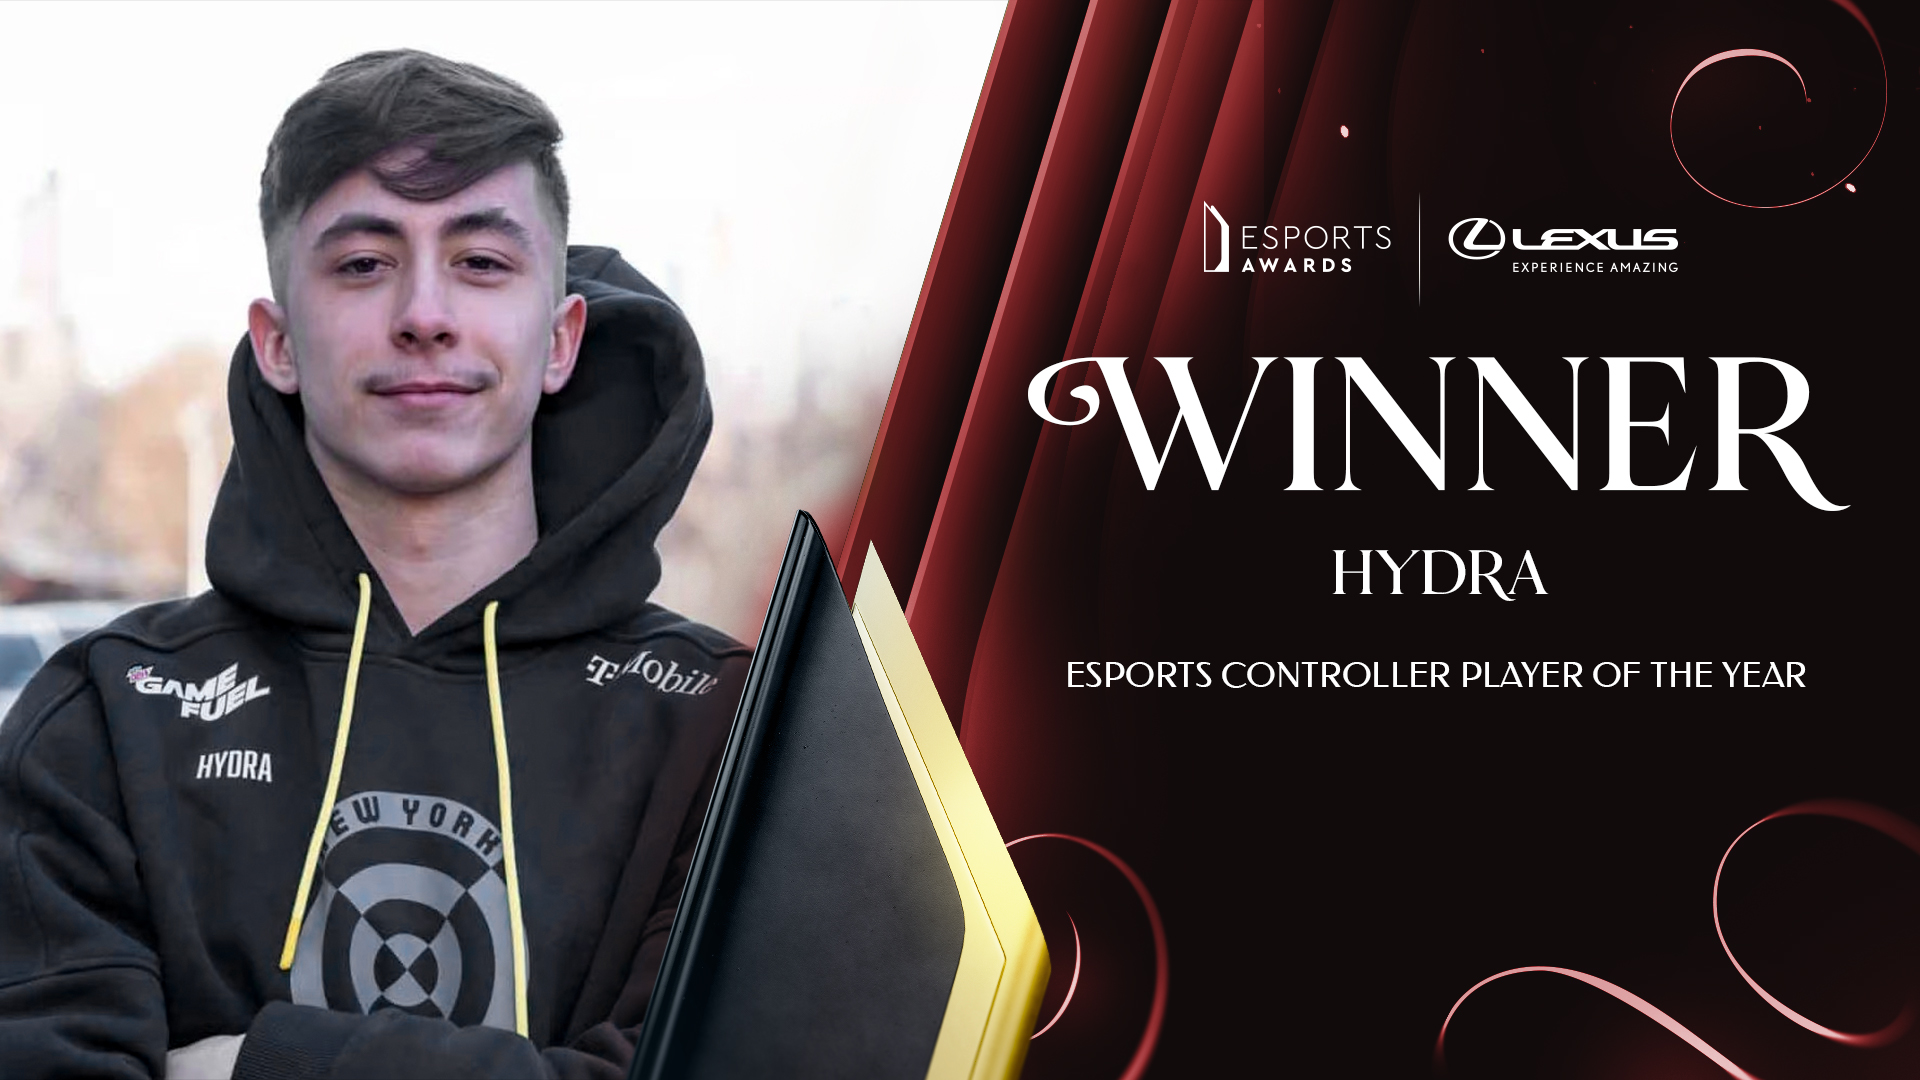 Esports Controller Player of the Year: Paco “HyDra” Rusiewiez